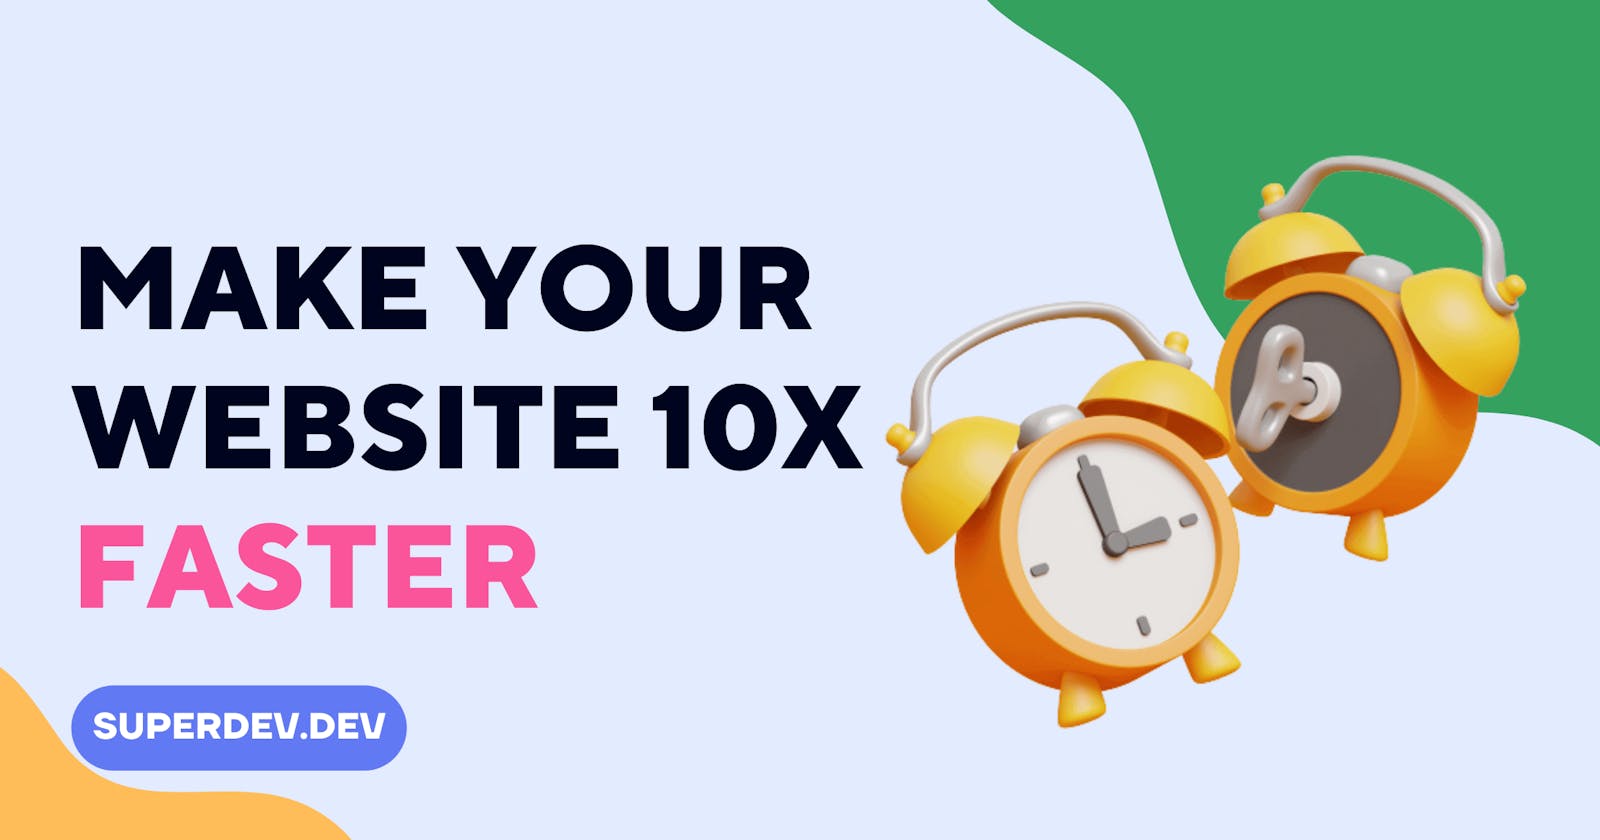 5 ways to make your website 10x faster